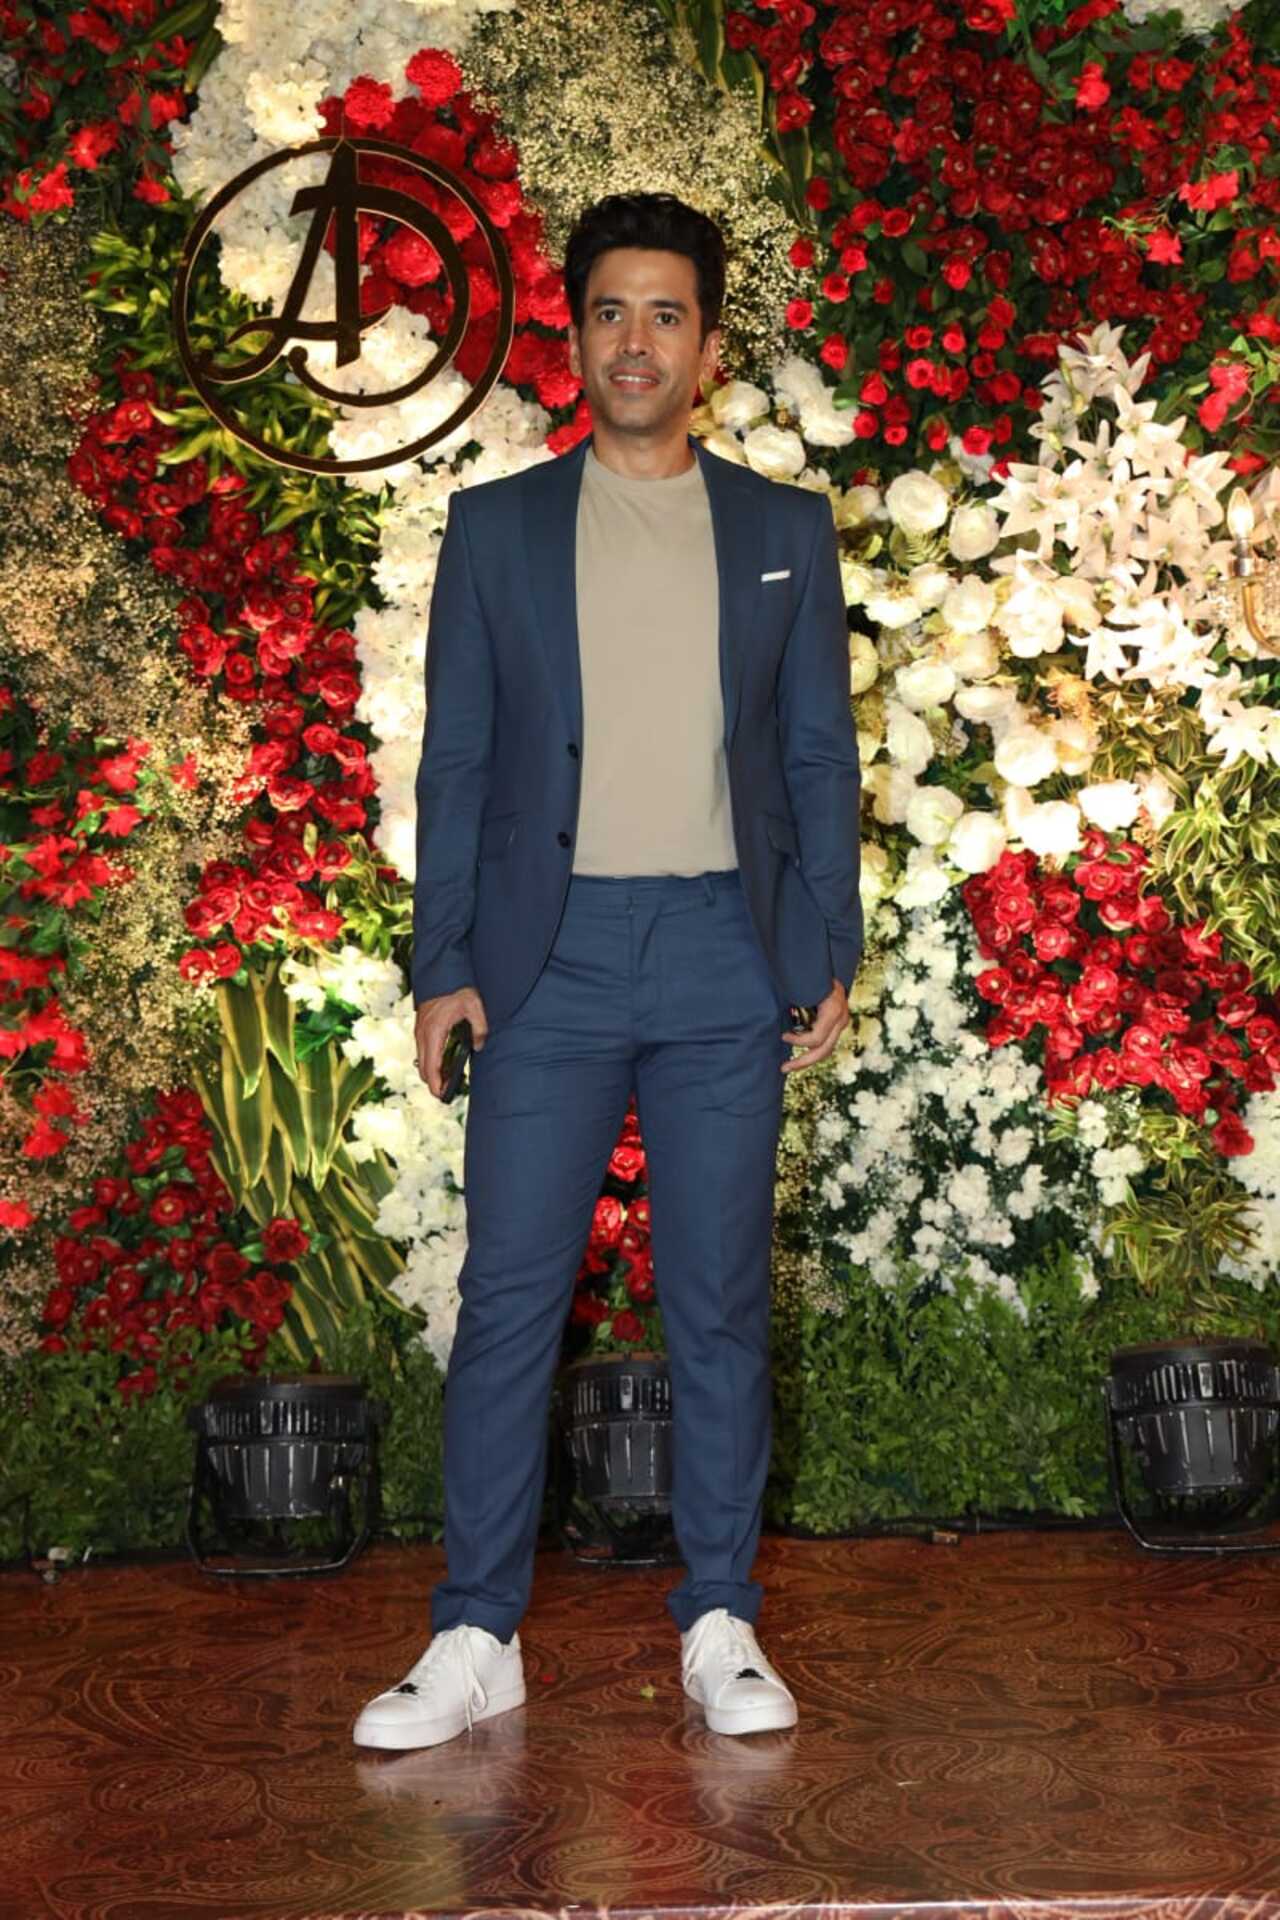 Tusshar Kapoor arrived solo for the wedding